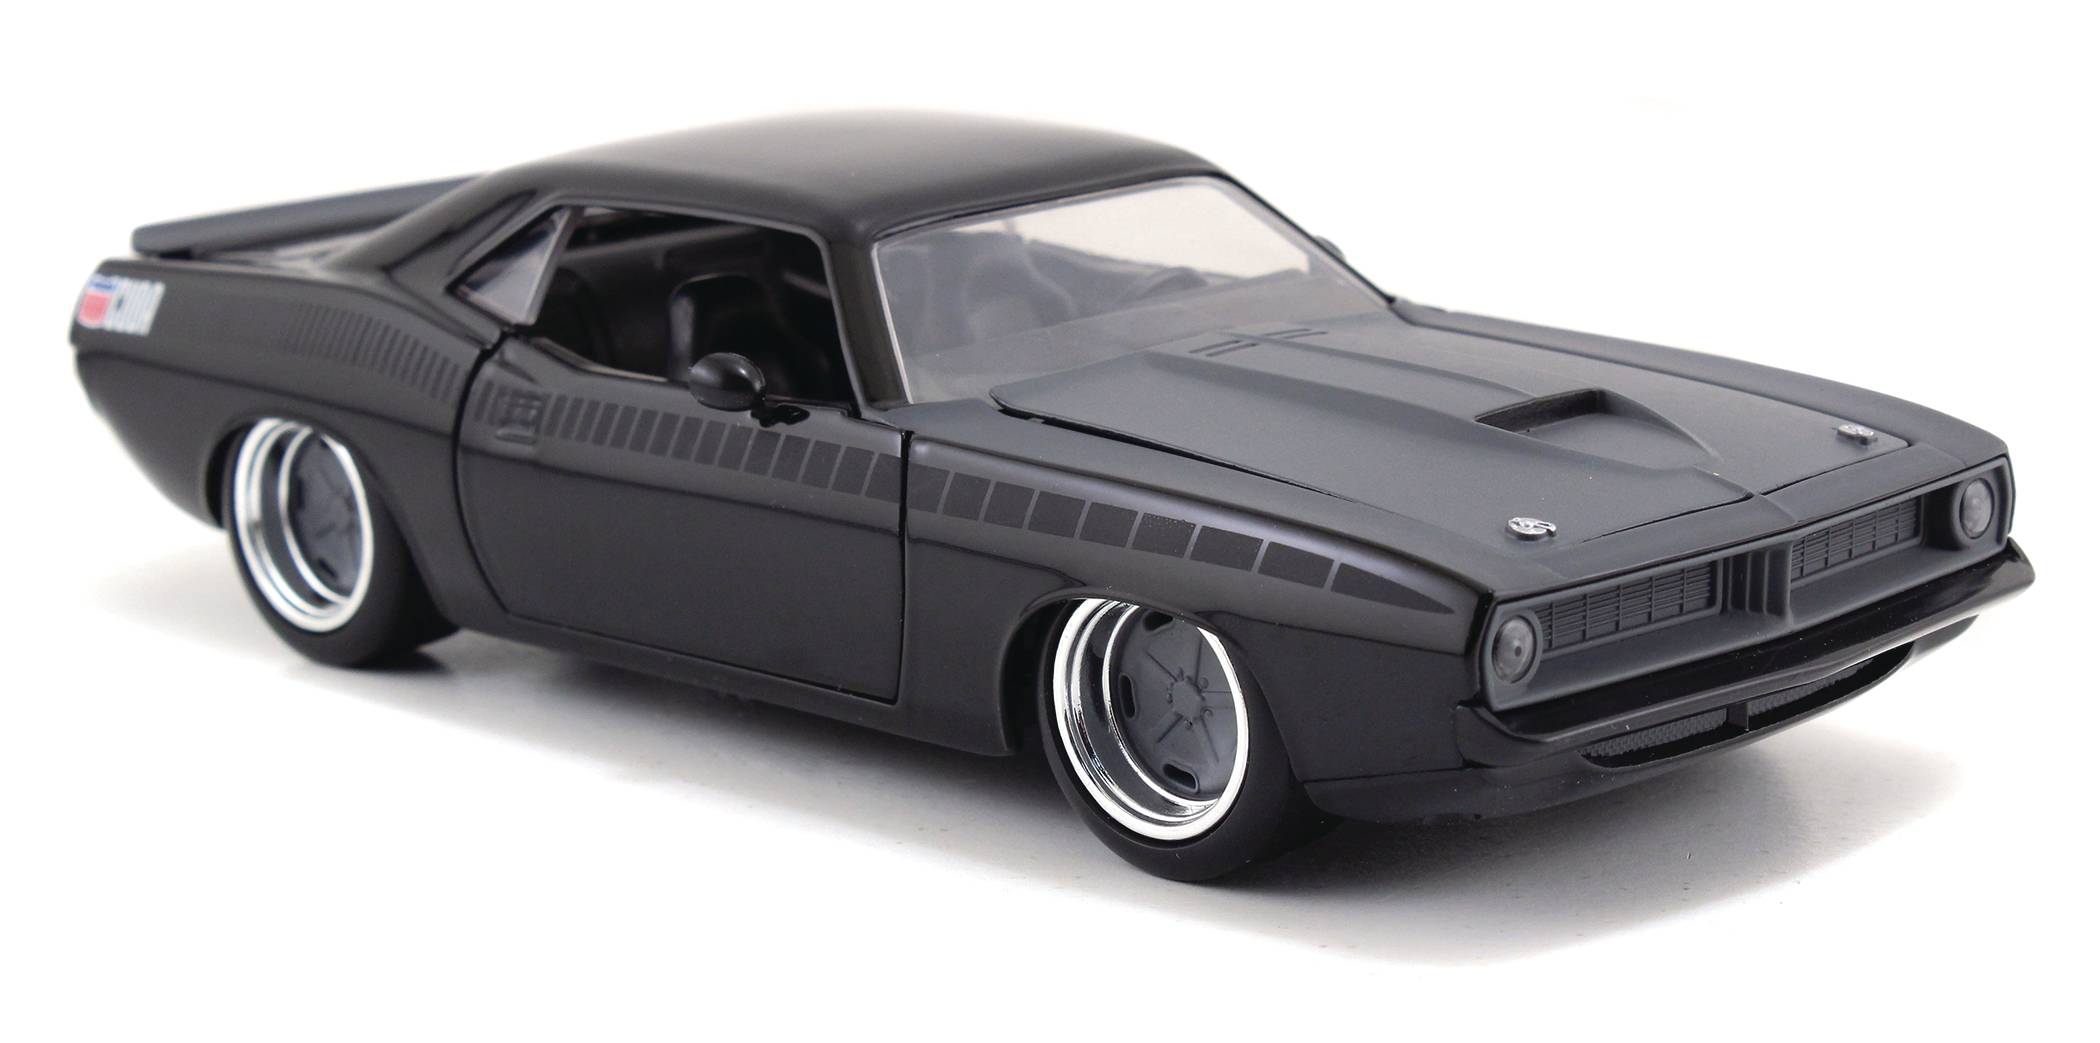 FF LETTYS PLYMOUTH BARRACUDA 1/24 VEHICLE